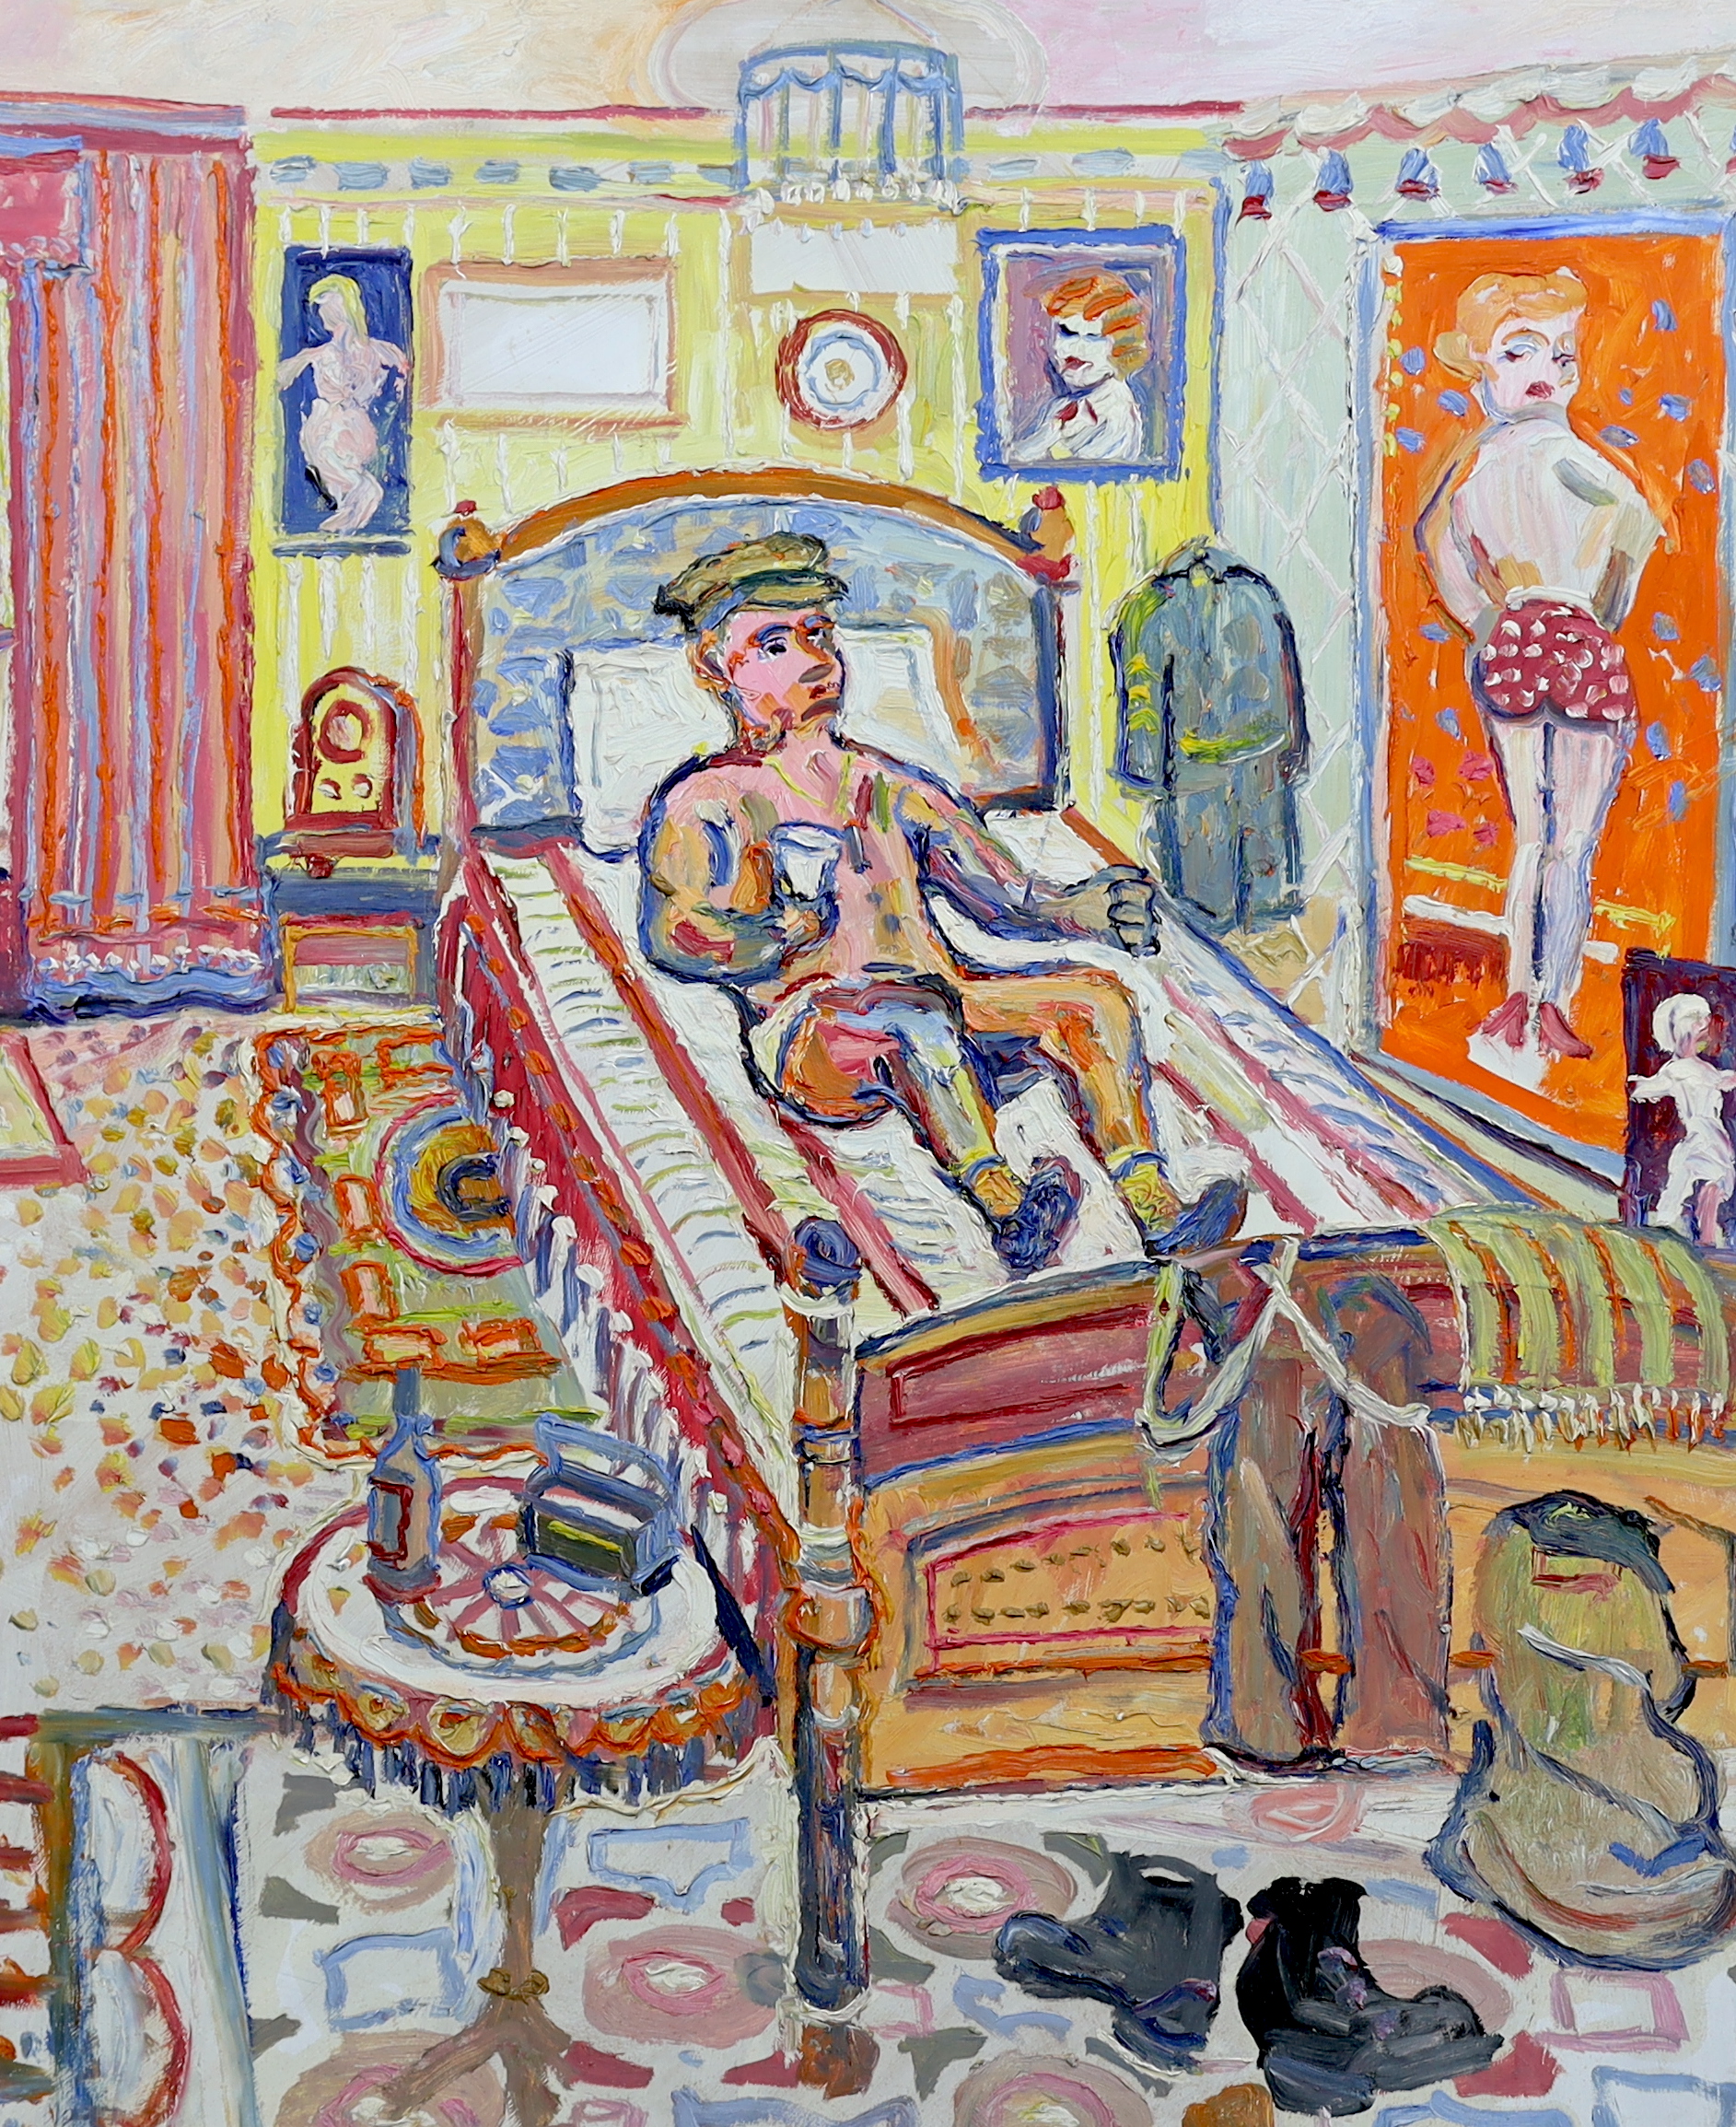 Fred Yates (English, 1922-2008), Soldier in his bedroom, oil on board, 101 x 84cm